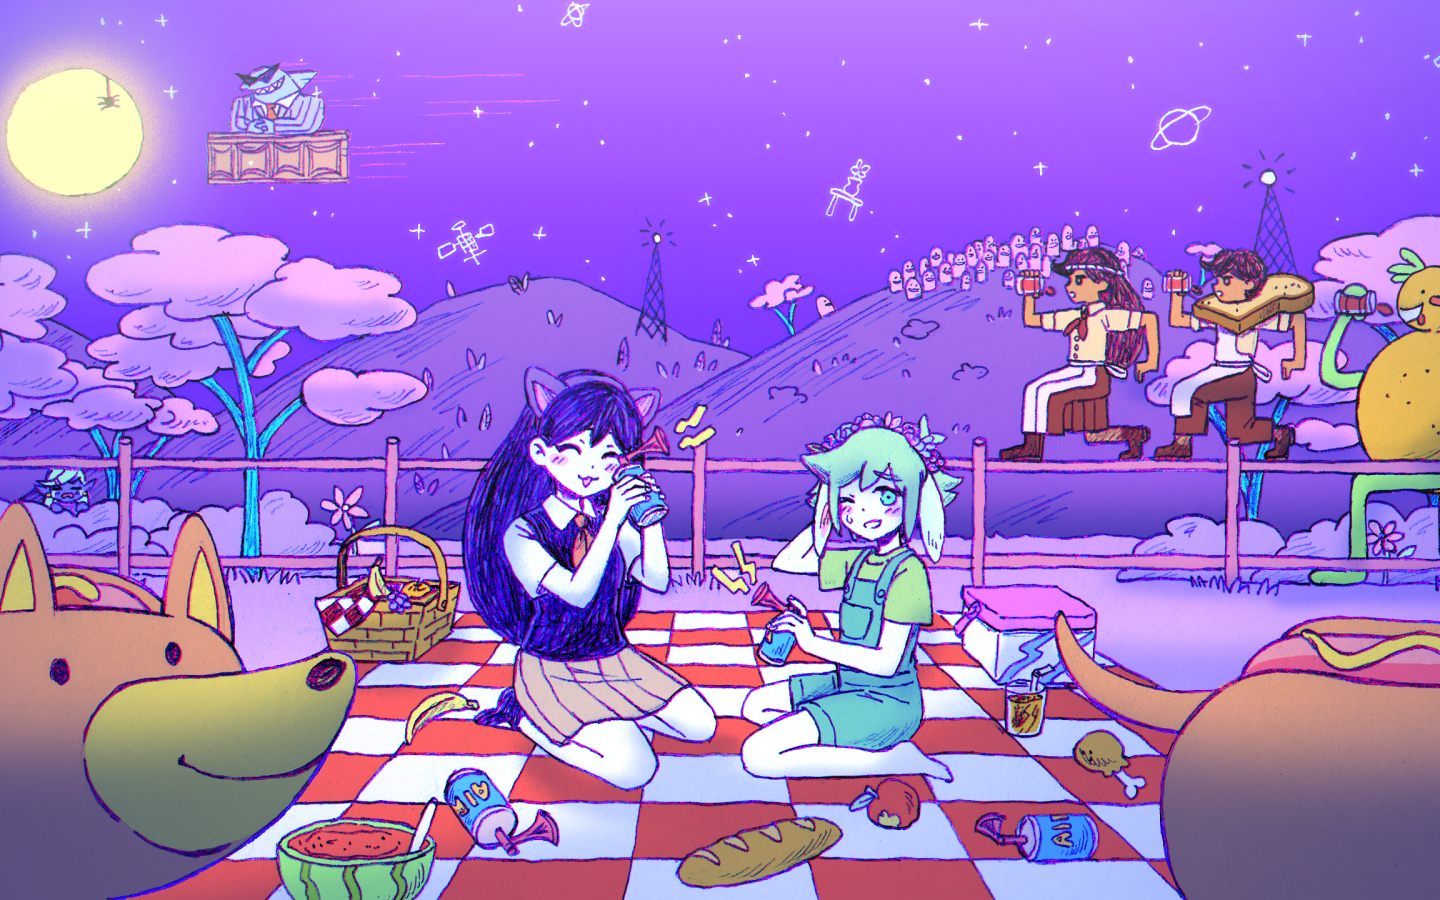 Step into a surreal, dark and beautiful world in Omori